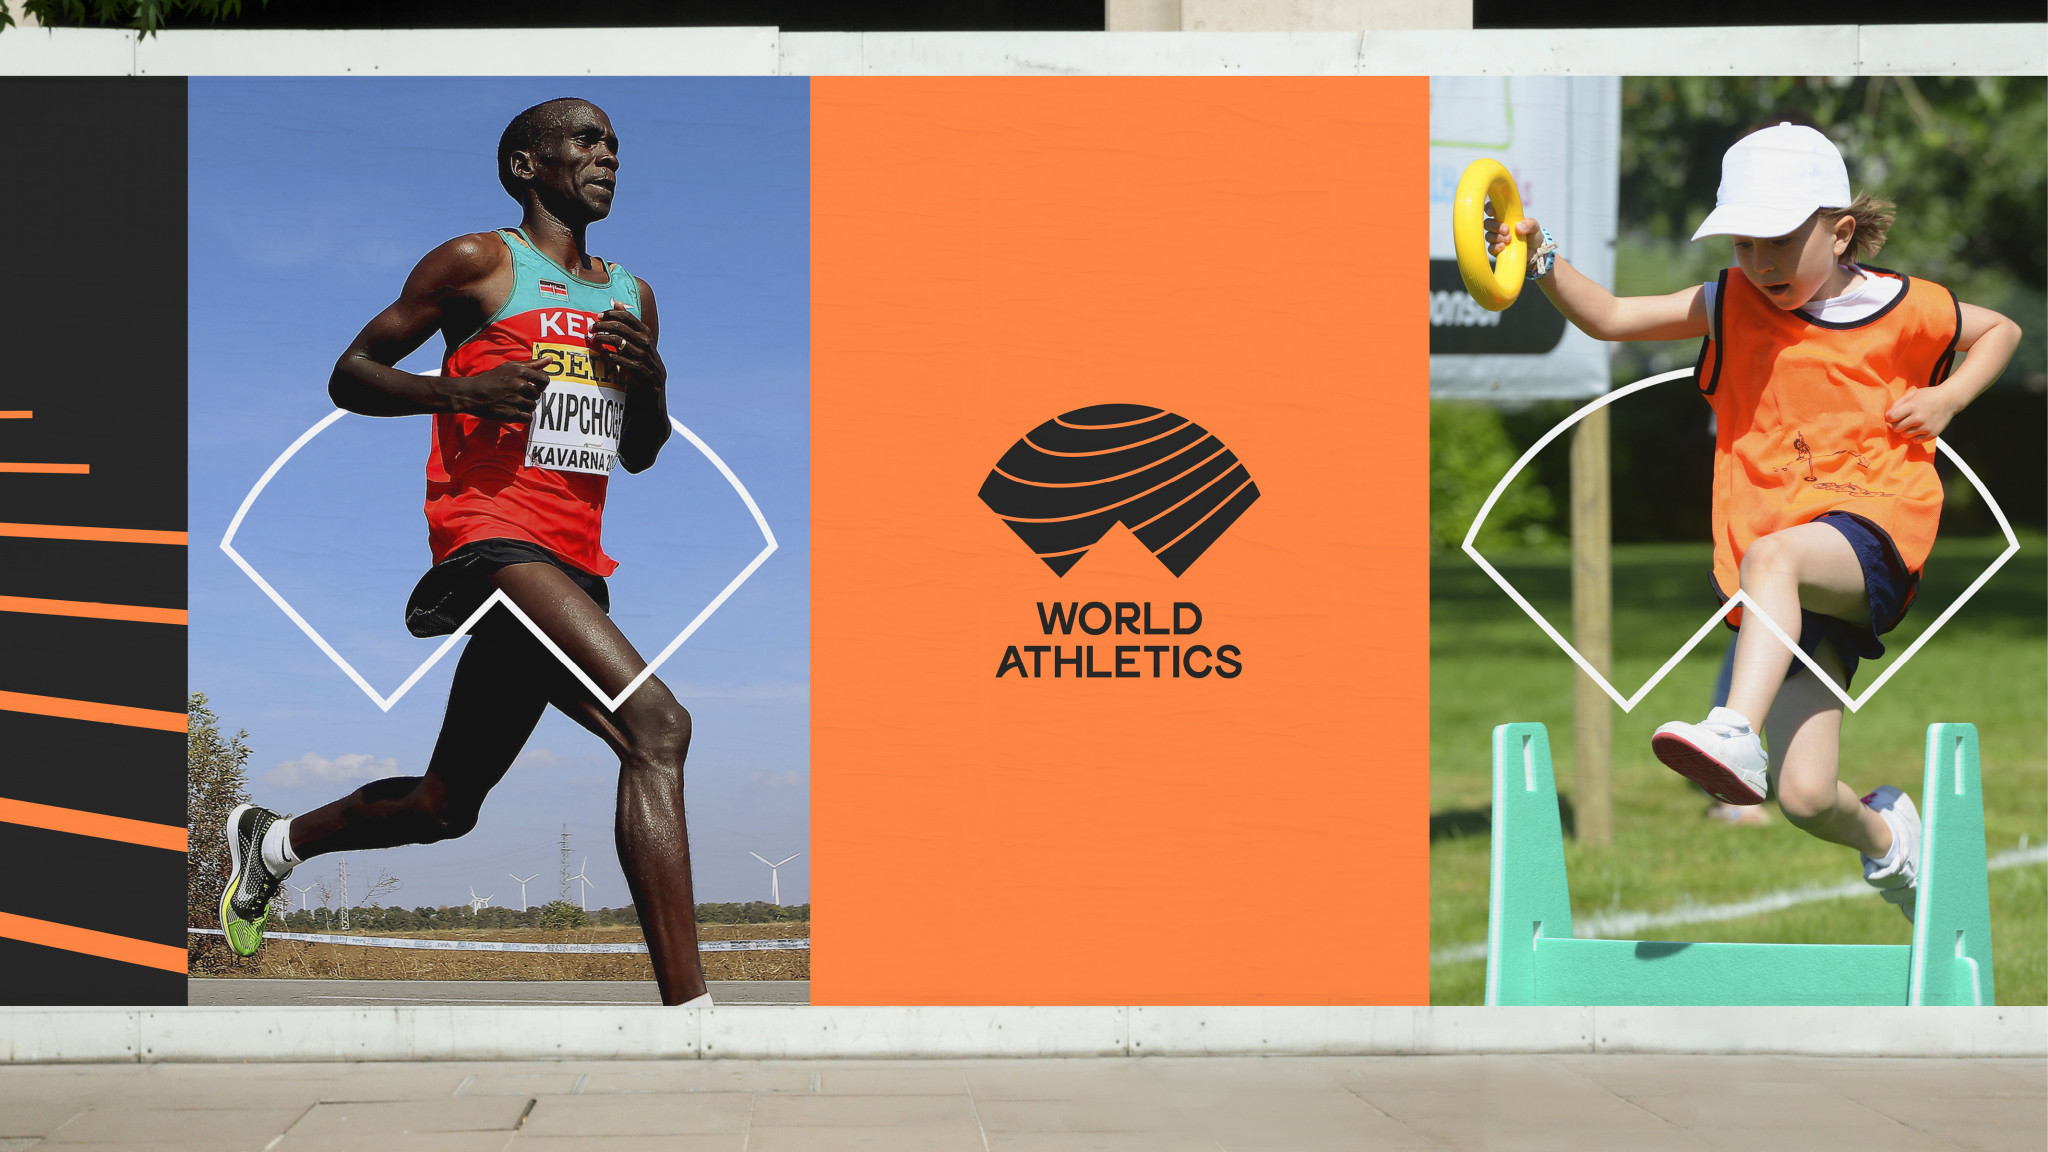 The IAAF claims the rebrand to World Athletics builds upon the organisation's restructuring and governance reform agenda to represent a modern, creative and positive face for the sport ©IAAF